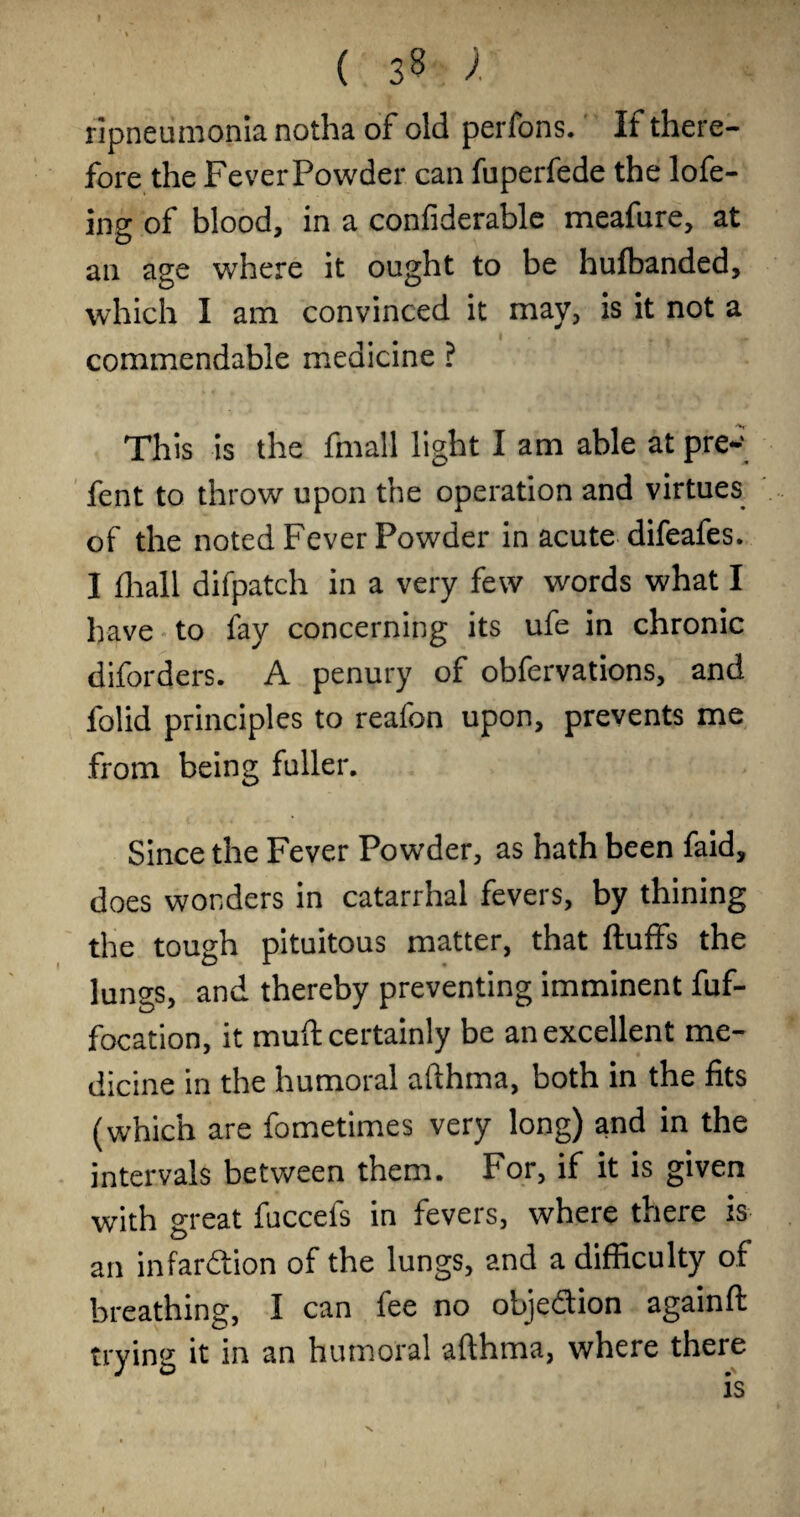 f ( 35 / ripneumonia notha of old perfons. If there¬ fore the FeverPowder can fuperfede the lofe- ing of blood, in a confiderable meafure, at an age where it ought to be hufbanded, which I am convinced it may, is it not a commendable medicine ? This is the fmall li^ht I am able at pre-‘ fent to throw upon the operation and virtues of the noted Fever Powder in acute difeafes. I flrall difpatch in a very few words what I have • to fay concerning its ufe in chronic diforders. A penury of obfervations, and folid principles to reafon upon, prevents me from being fuller. Since the Fever Powder, as hath been faid, does wonders in catarrhal fevers, by thining the tough pituitous matter, that fluffs the lungs, and thereby preventing imminent fuf- focation, it muft certainly be an excellent me¬ dicine in the humoral afthma, both in the fits (which are fometimes very long) and in the intervals between them. For, if it is given with great fuccefs in fevers, where there is an infarftion of the lungs, and a difficulty of breathing, I can fee no objedion againfl trying it in an humoral afthma, where there I